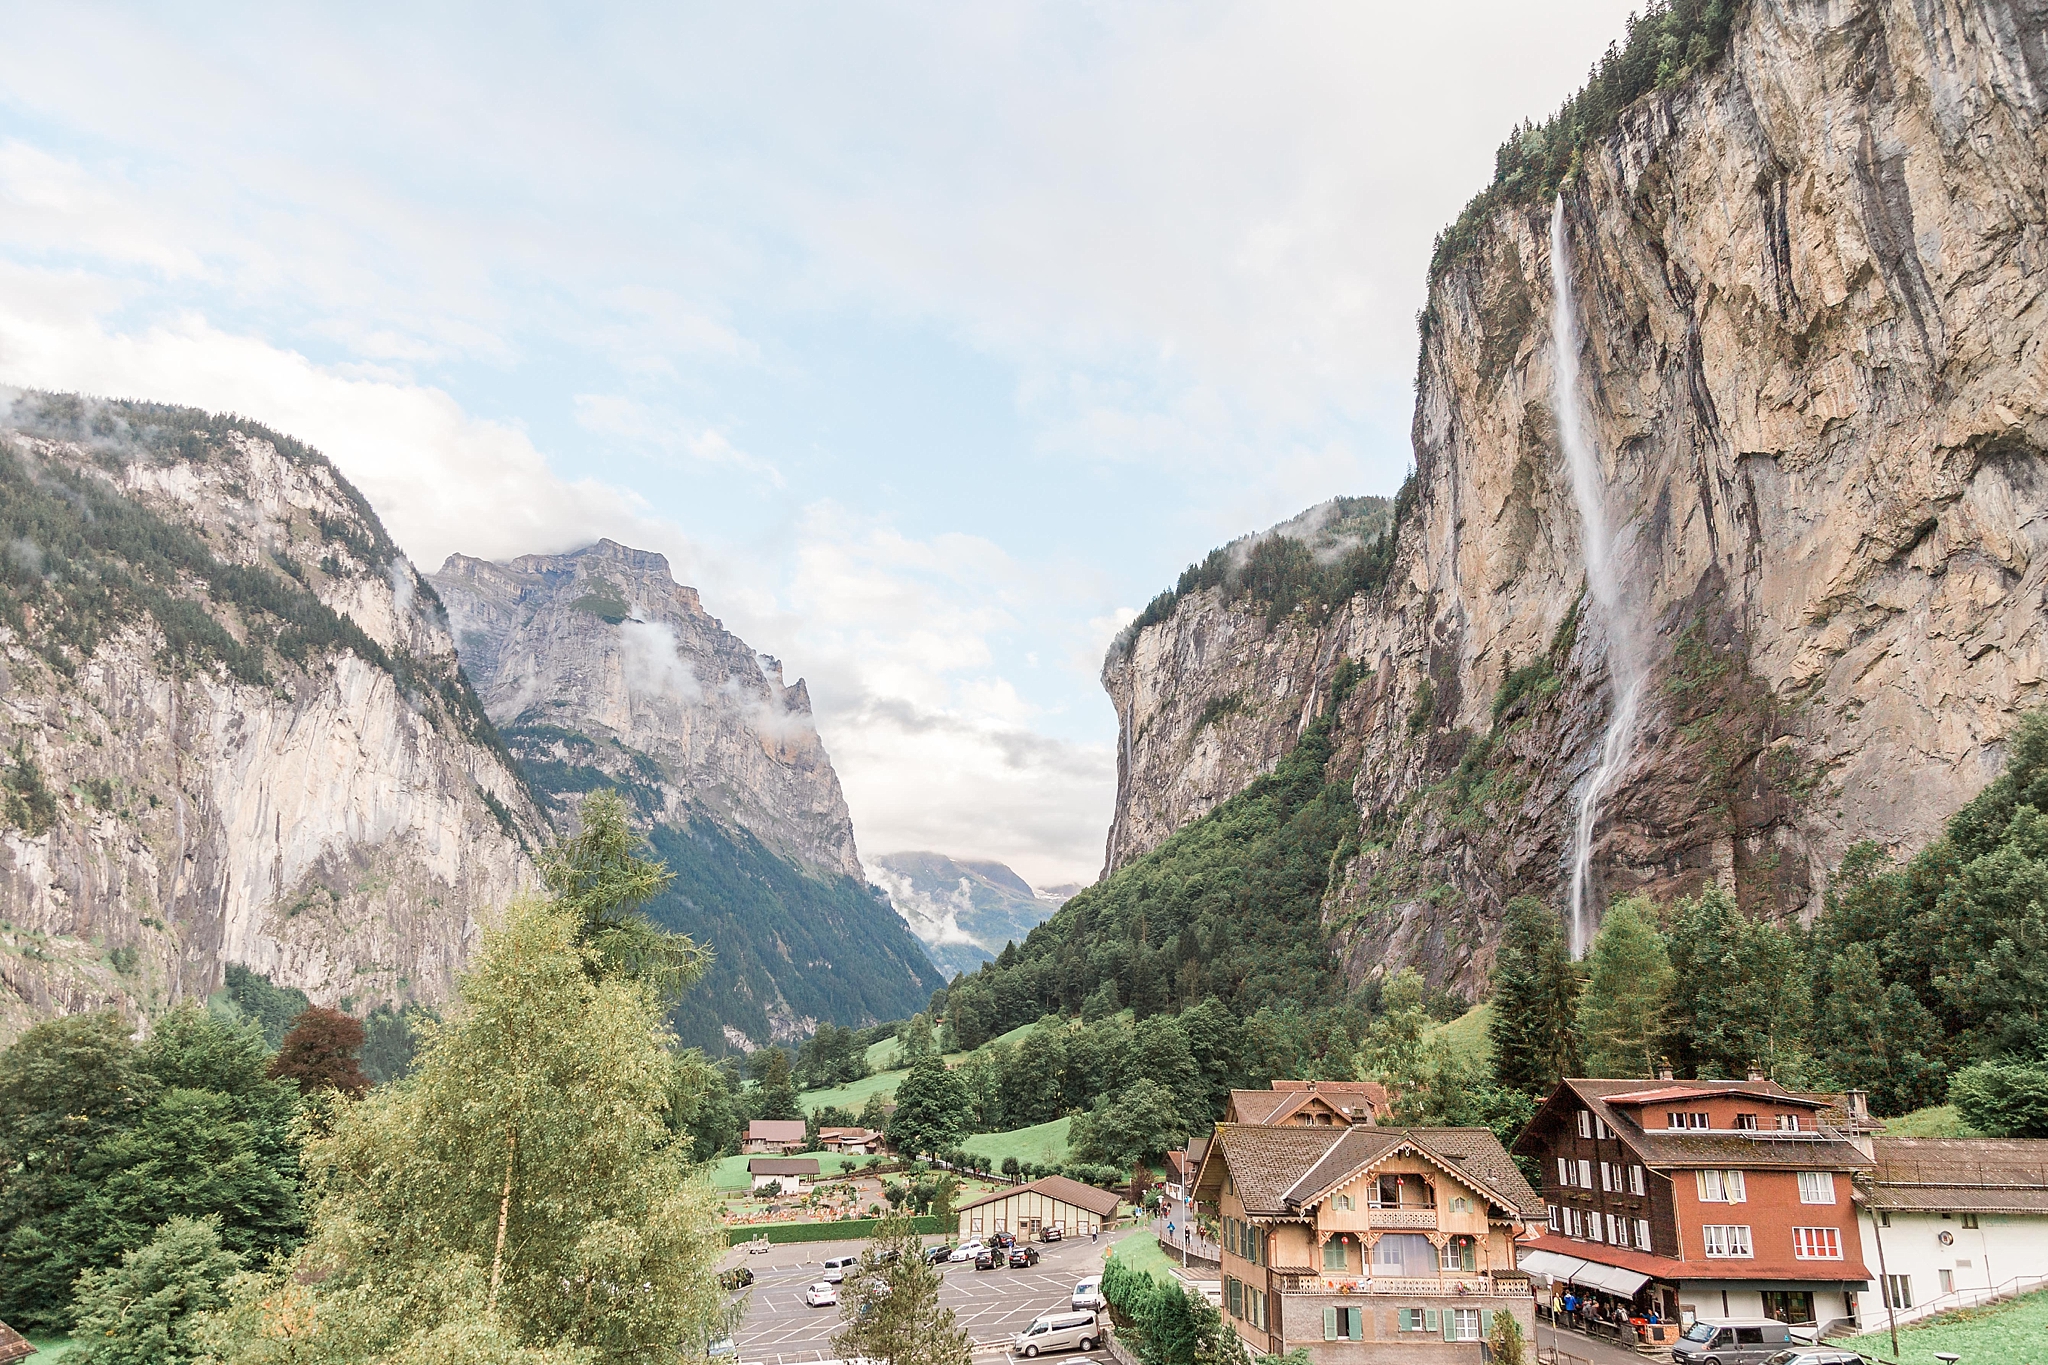 Vacation photos captured by a fine art photographer across Southern France and the Swiss Alps including stops in Gordes, Chamonix, Lauterbrunnen, and Murren. 